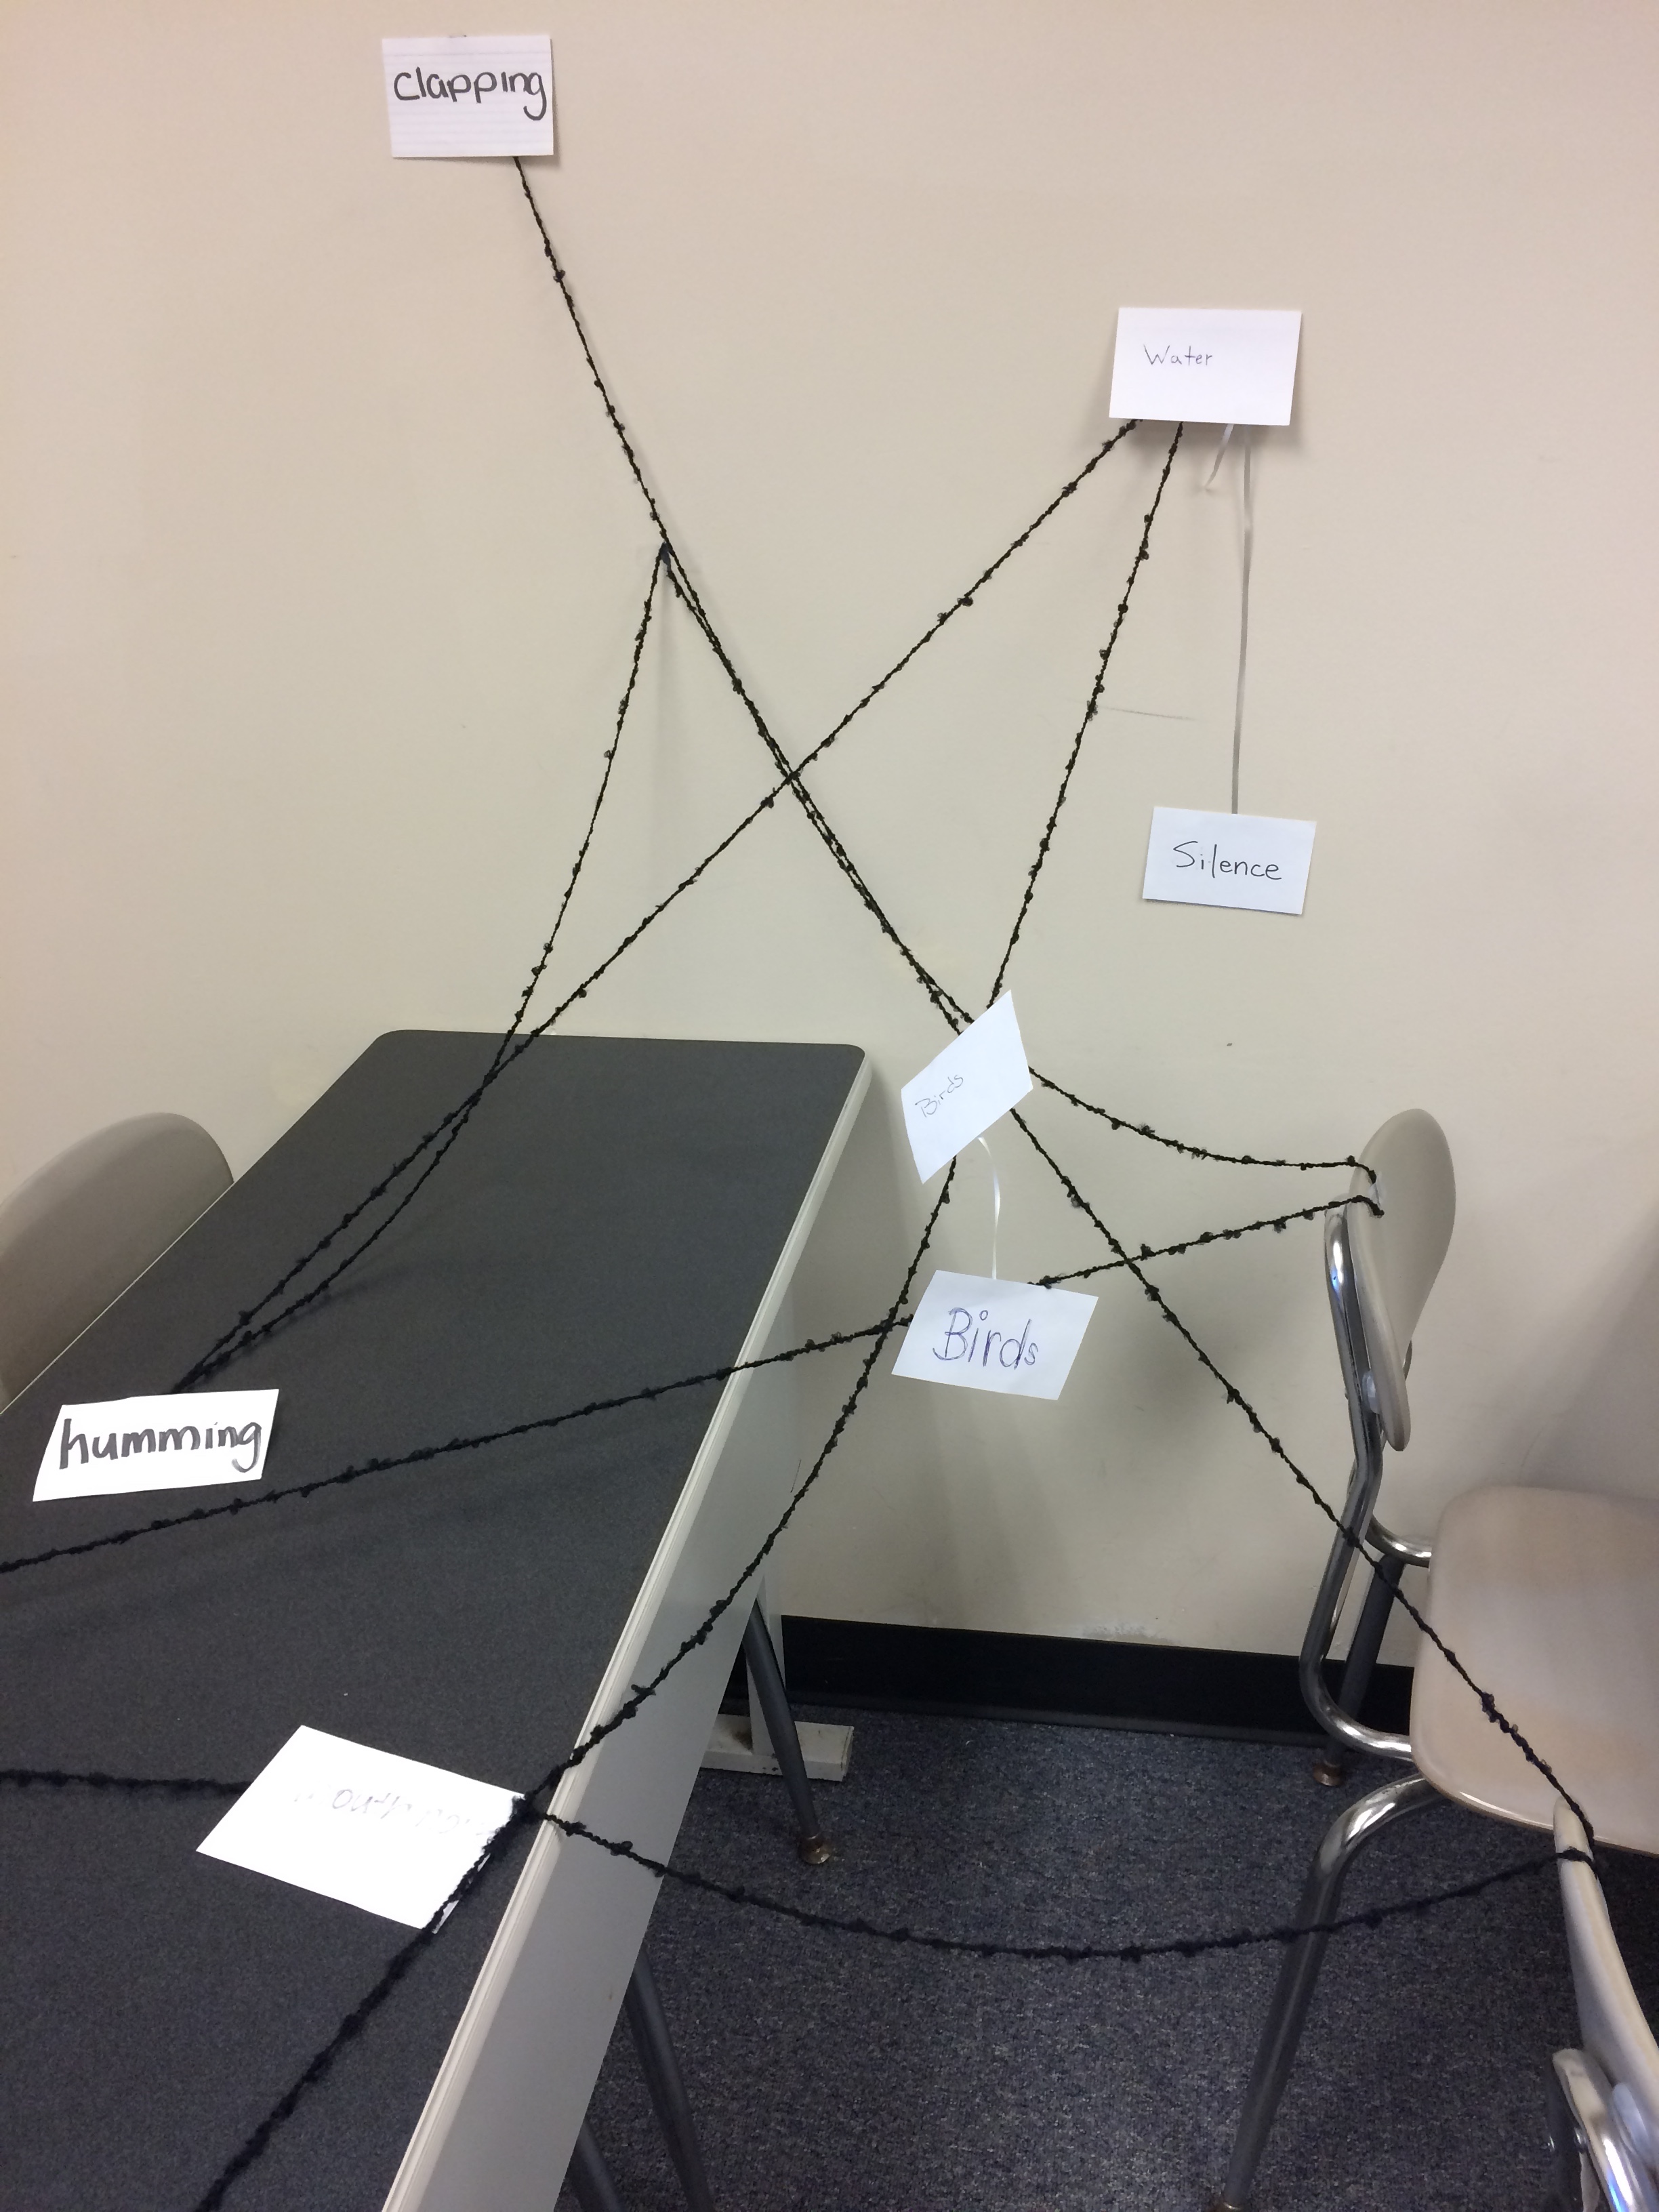 A photograph of string holding index cards and indicating where/how sounds should unfold in time in a particular location in a soundscape.